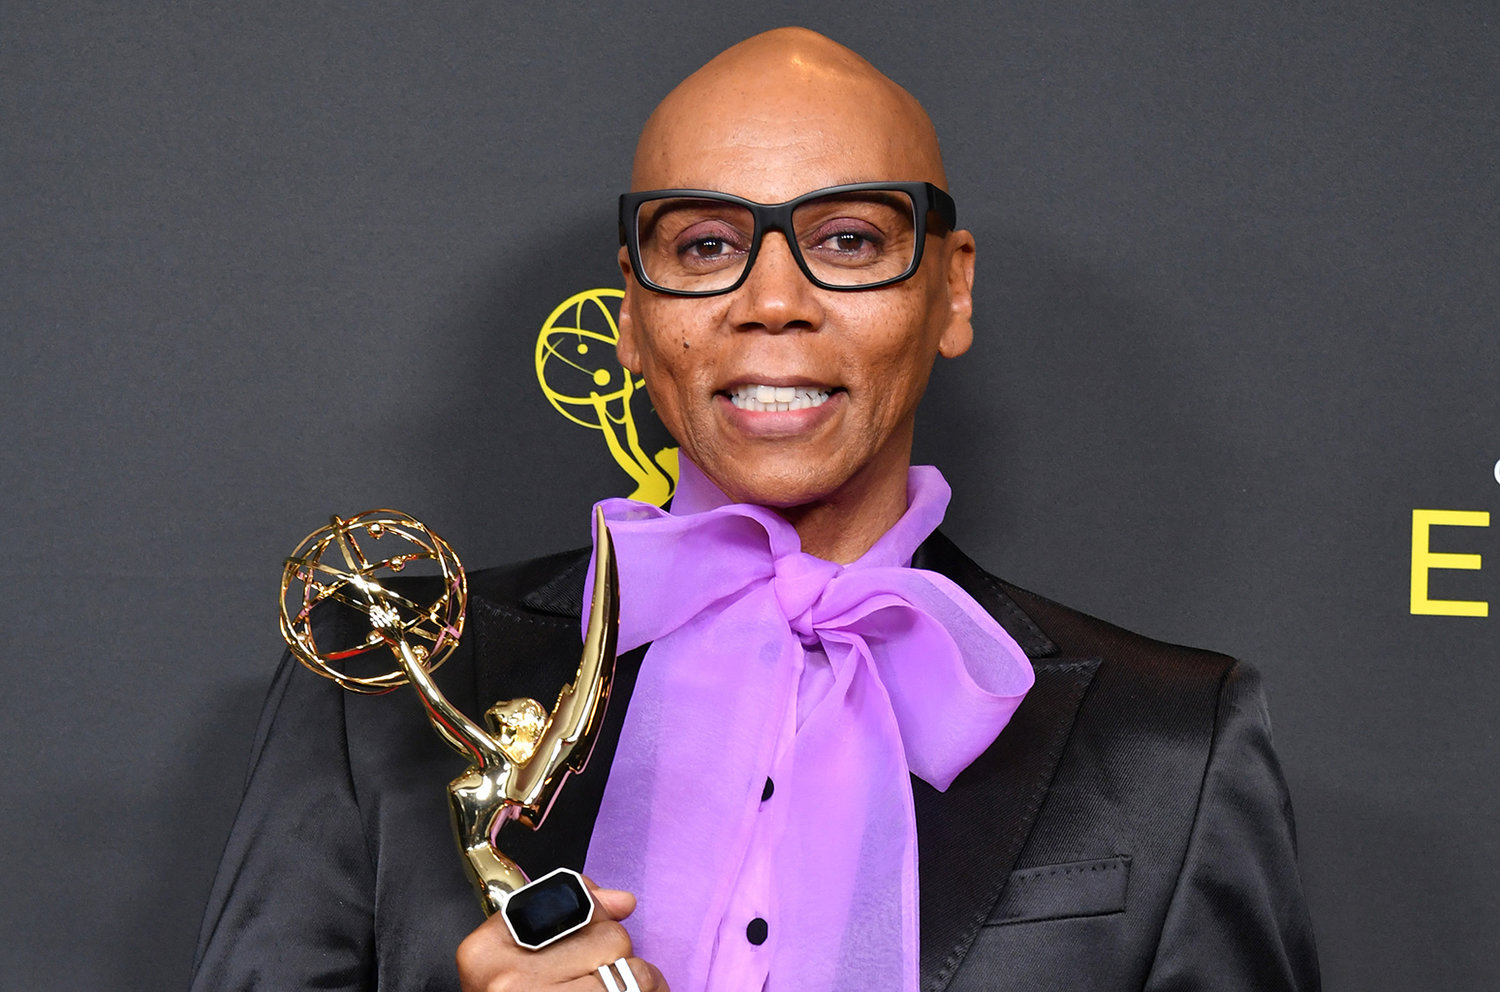 Amy Sussman/Getty Images RuPaul poses with the outstanding host for a reality or competition program award for 'RuPaul's Drag Race' during the 2019 Creative Arts Emmy Awards on Sept. 14, 2019 in Los Angeles.